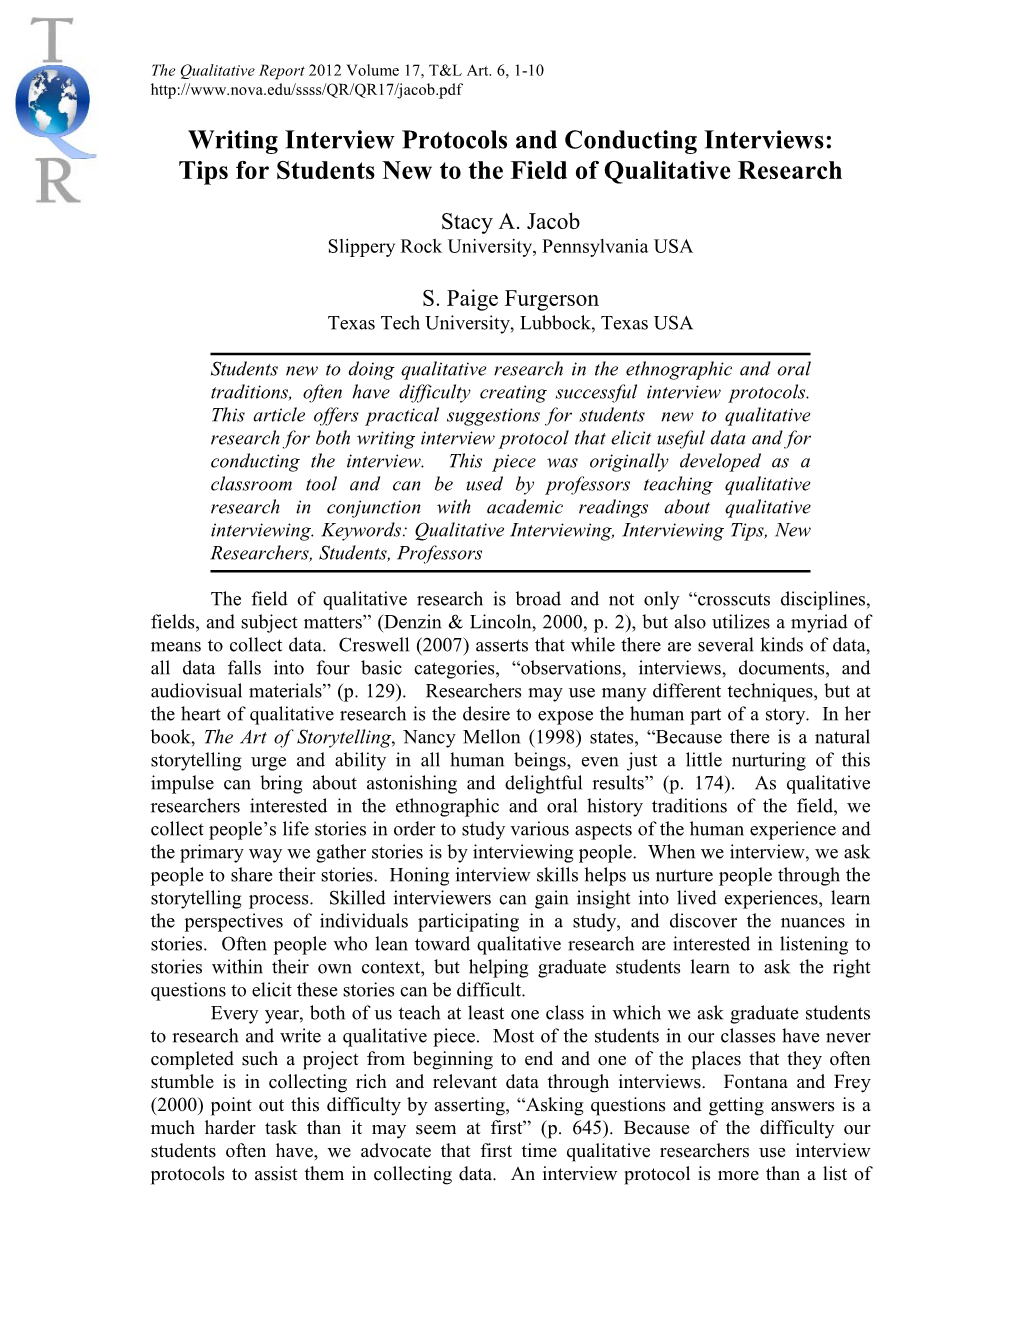 Writing Interview Protocols and Conducting Interviews: Tips for Students New to the Field of Qualitative Research